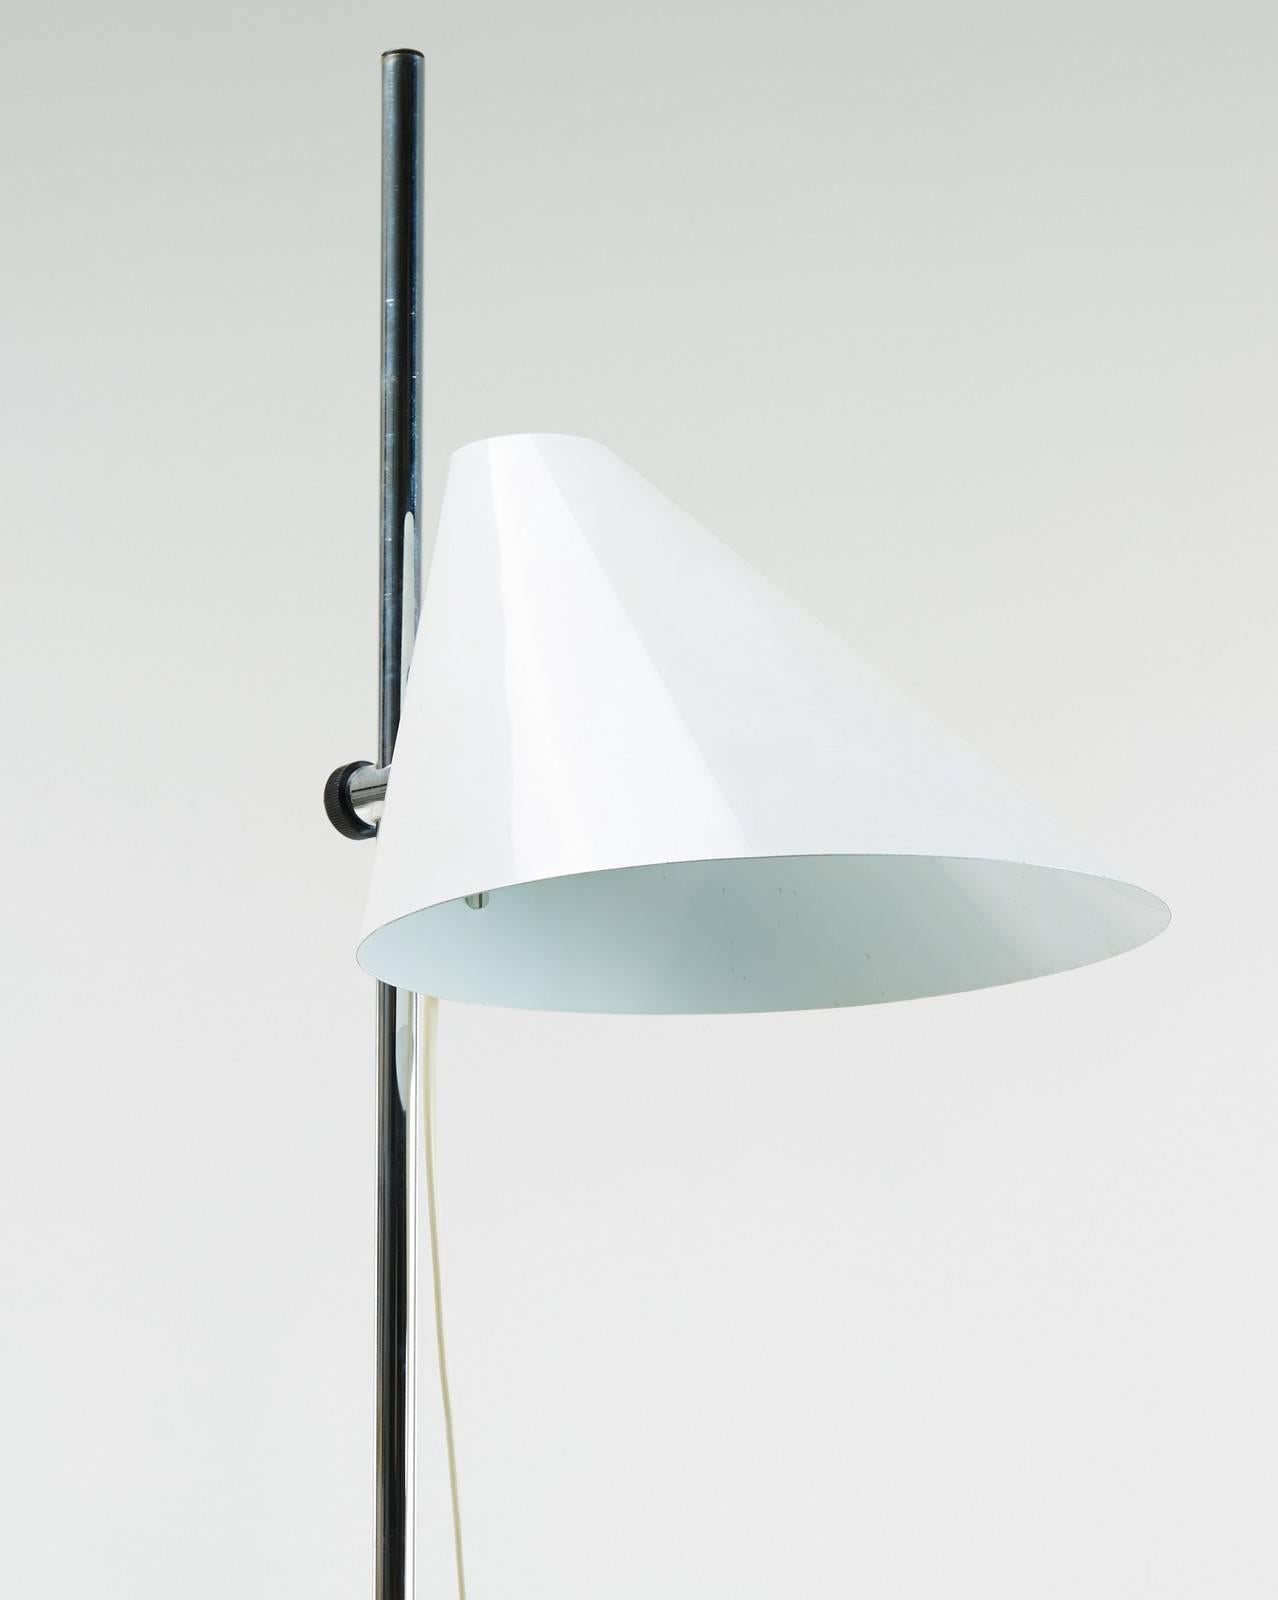 A floor lamp designed by Hans-Agne Jakobsson, Sweden, circa 1970.
White metal adjustable height shade on polished chrome stem.
Existing wiring, rewiring available upon request.
Two items available, price is for each.